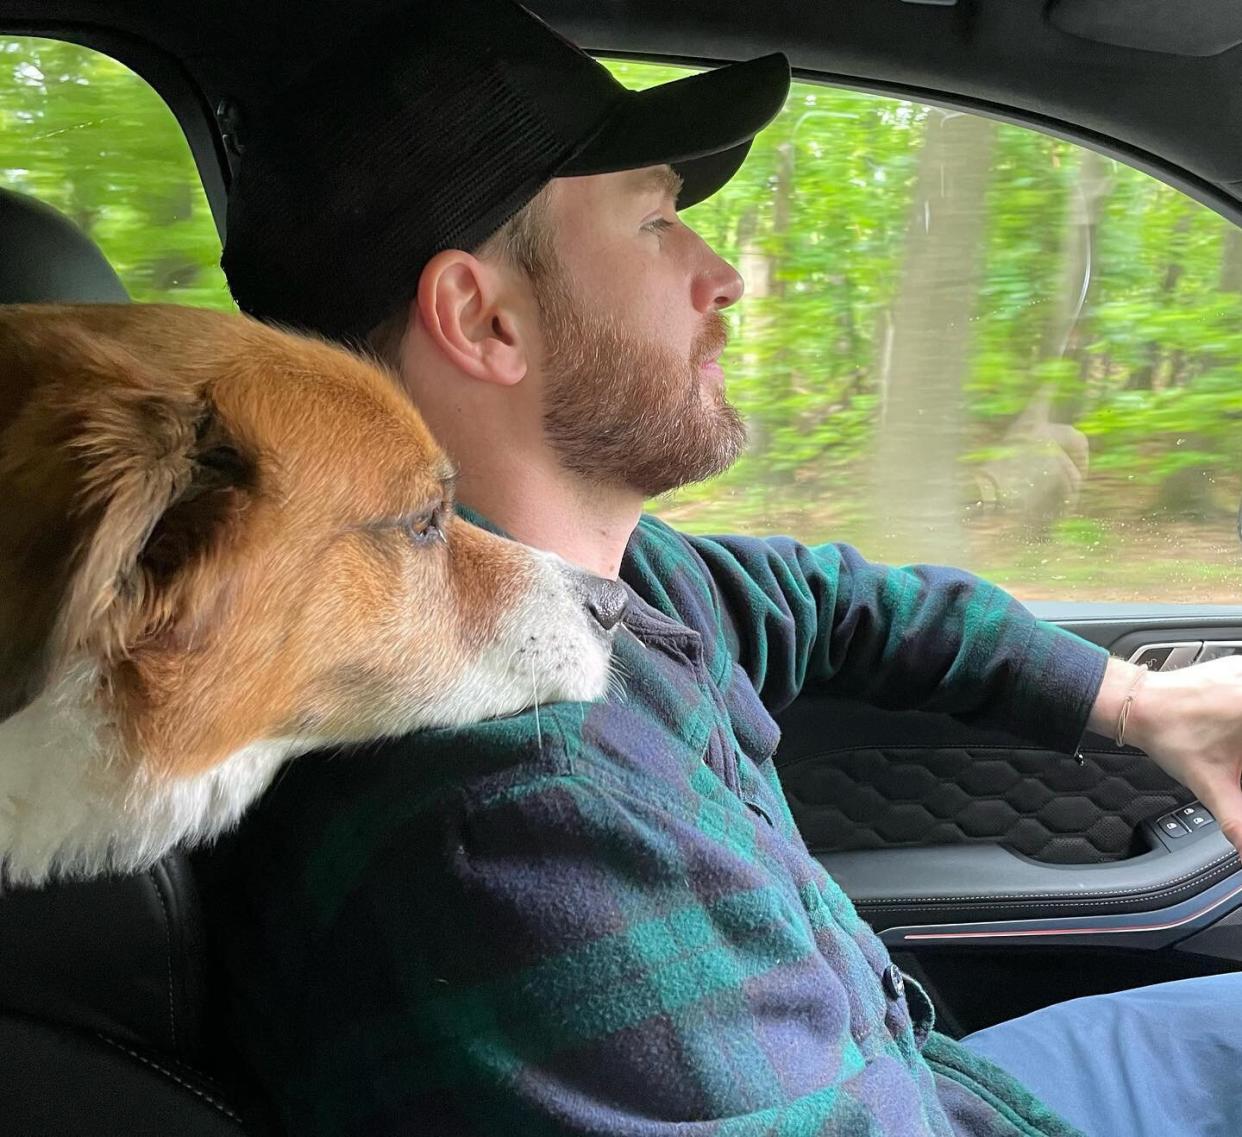 Chris Evans Celebrates National Rescue Dog Day with Adorable Picture of Himself and Pet Dodger. https://www.instagram.com/p/CdzBf79rfCv/.